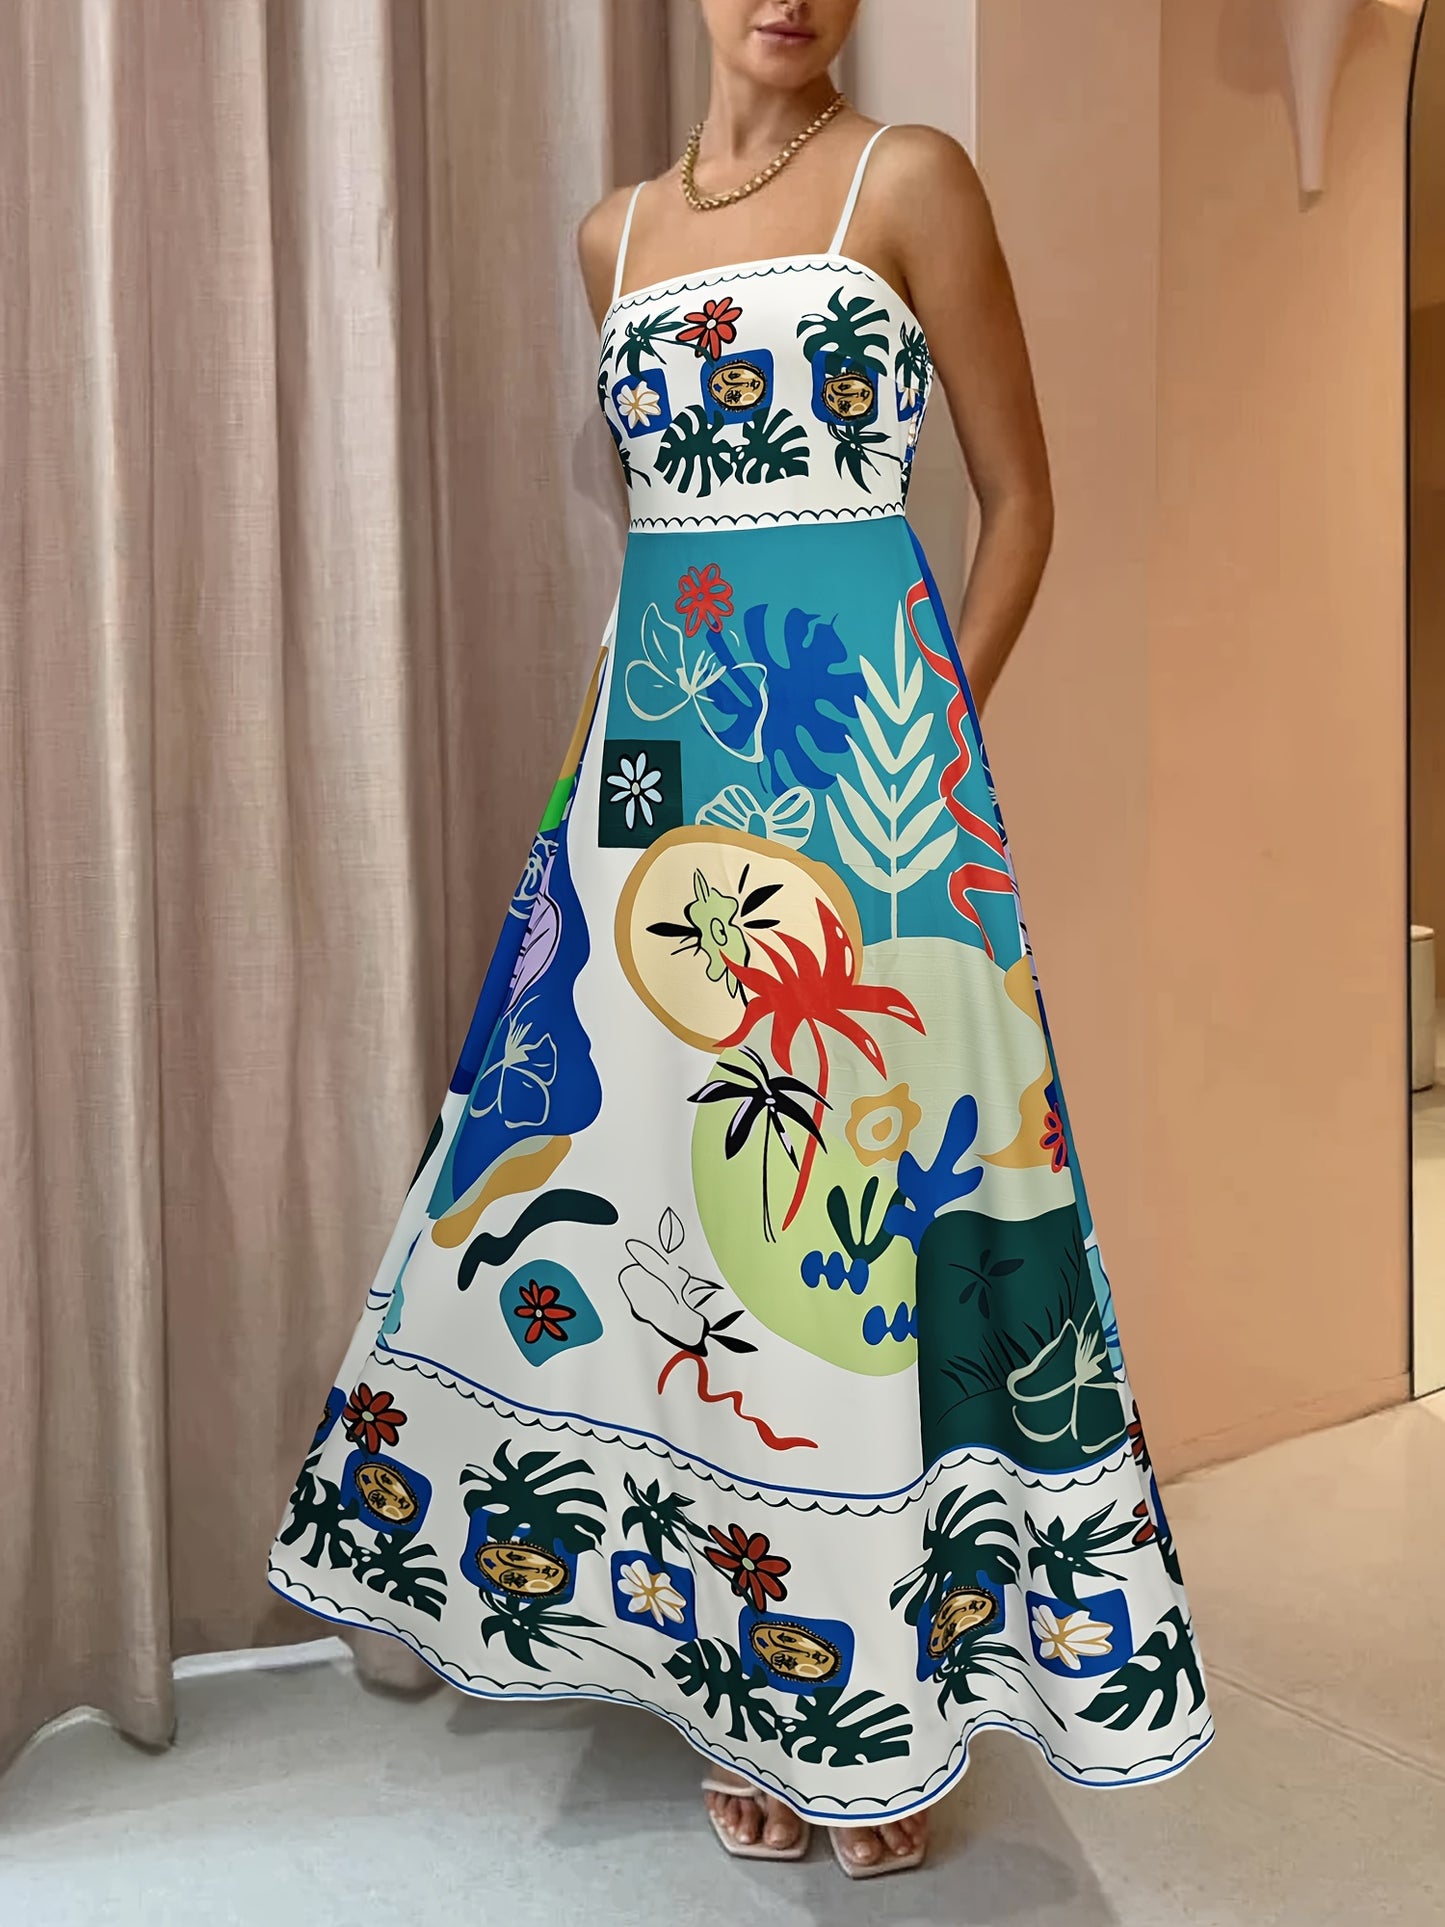 VAKKV  Vibrant Graffiti Print Dress - Stylish Square Neckline, Daring Backless Design, Delicate Spaghetti Straps, Flattering High Waist Silhouette, Chic Cami Style - Perfect for Women, Ideal for Casual Occasions, Womens Clothing